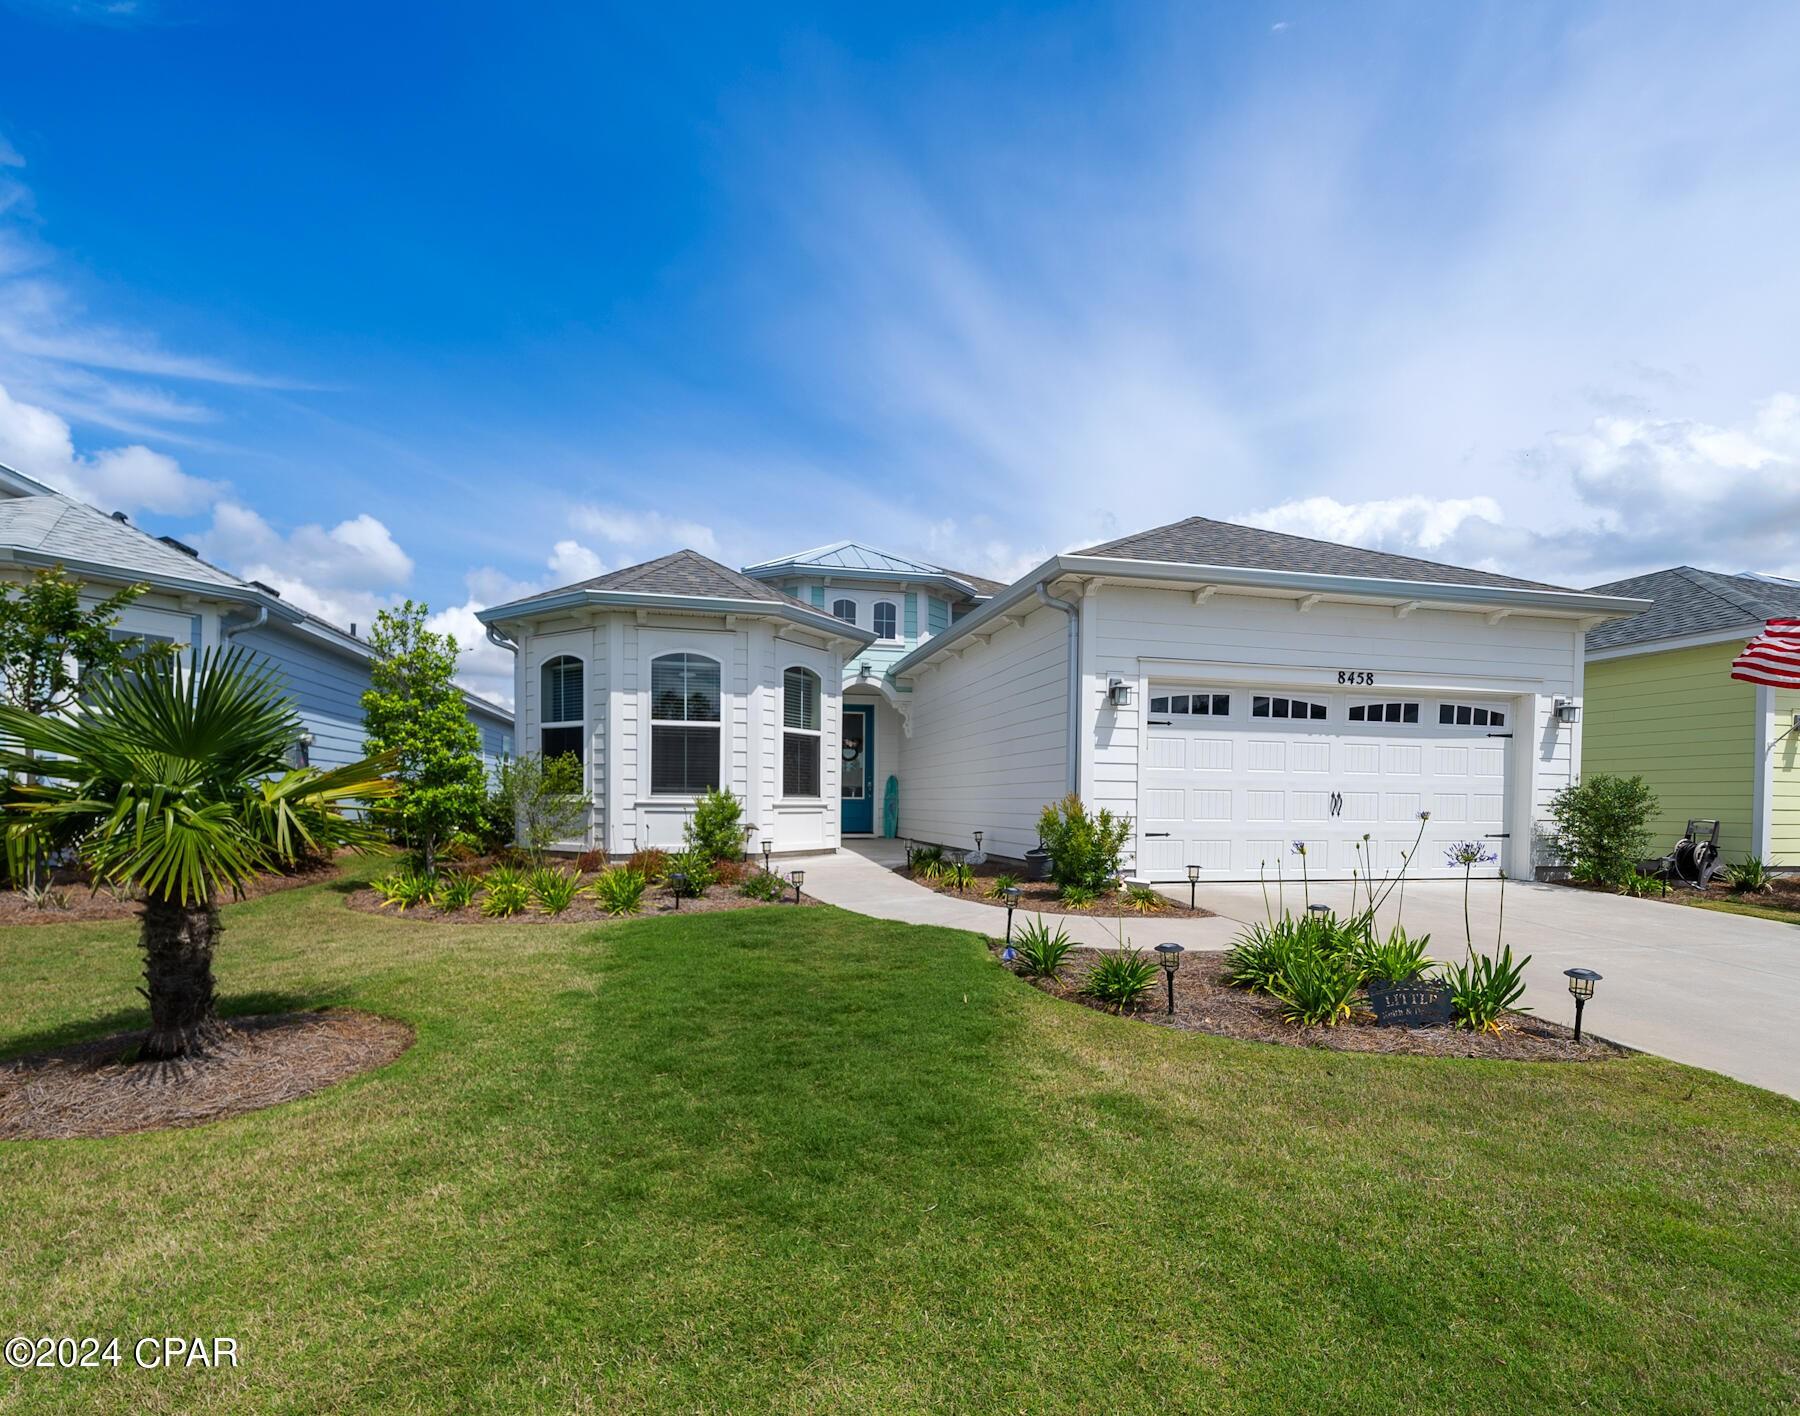 Property Image for 8458 Coral Reef Way